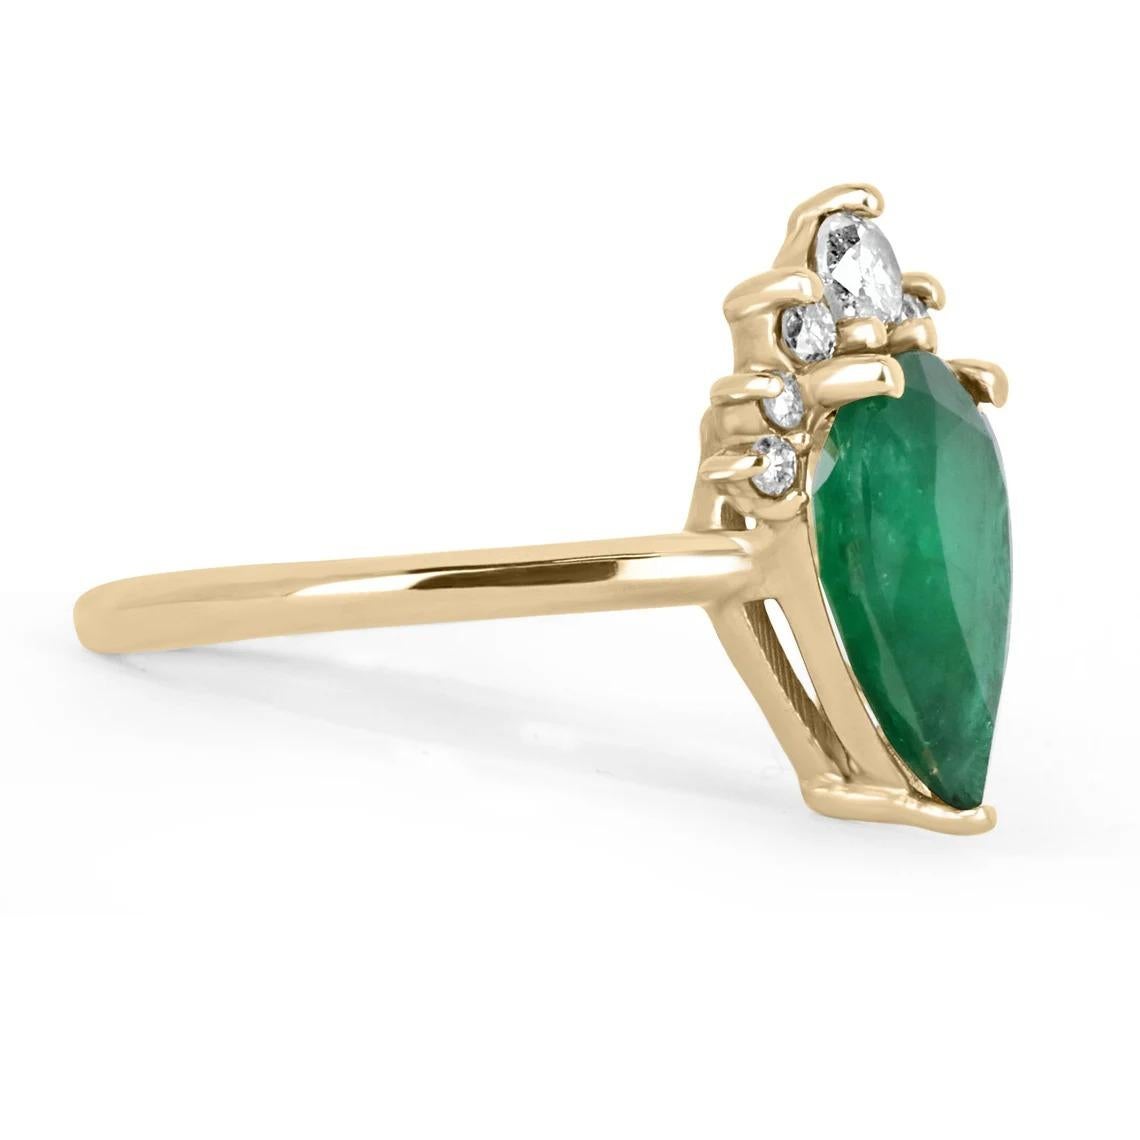 The perfect, tiara emerald & diamond engagement ring, a right-hand ring, or just for everyday wear! This gorgeous piece is sure to get all the right attention! The 2.35ct pear-shaped emerald is nestled in numerous golden prongs. Minor Jardins exist